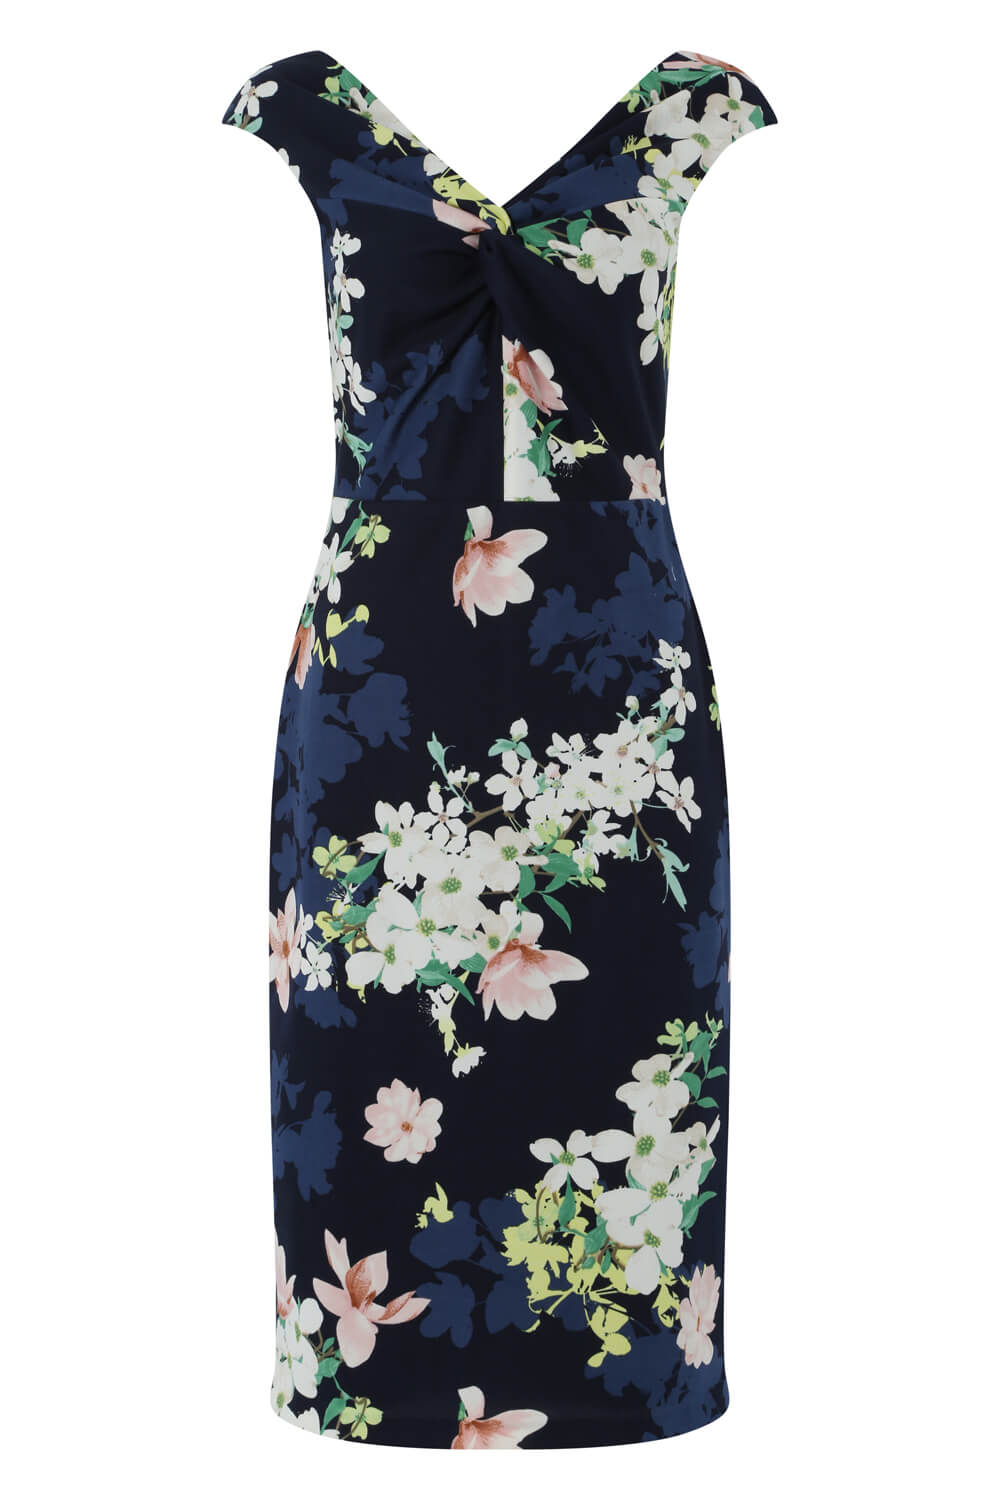 Navy  Twist Front Floral Print Dress, Image 5 of 5